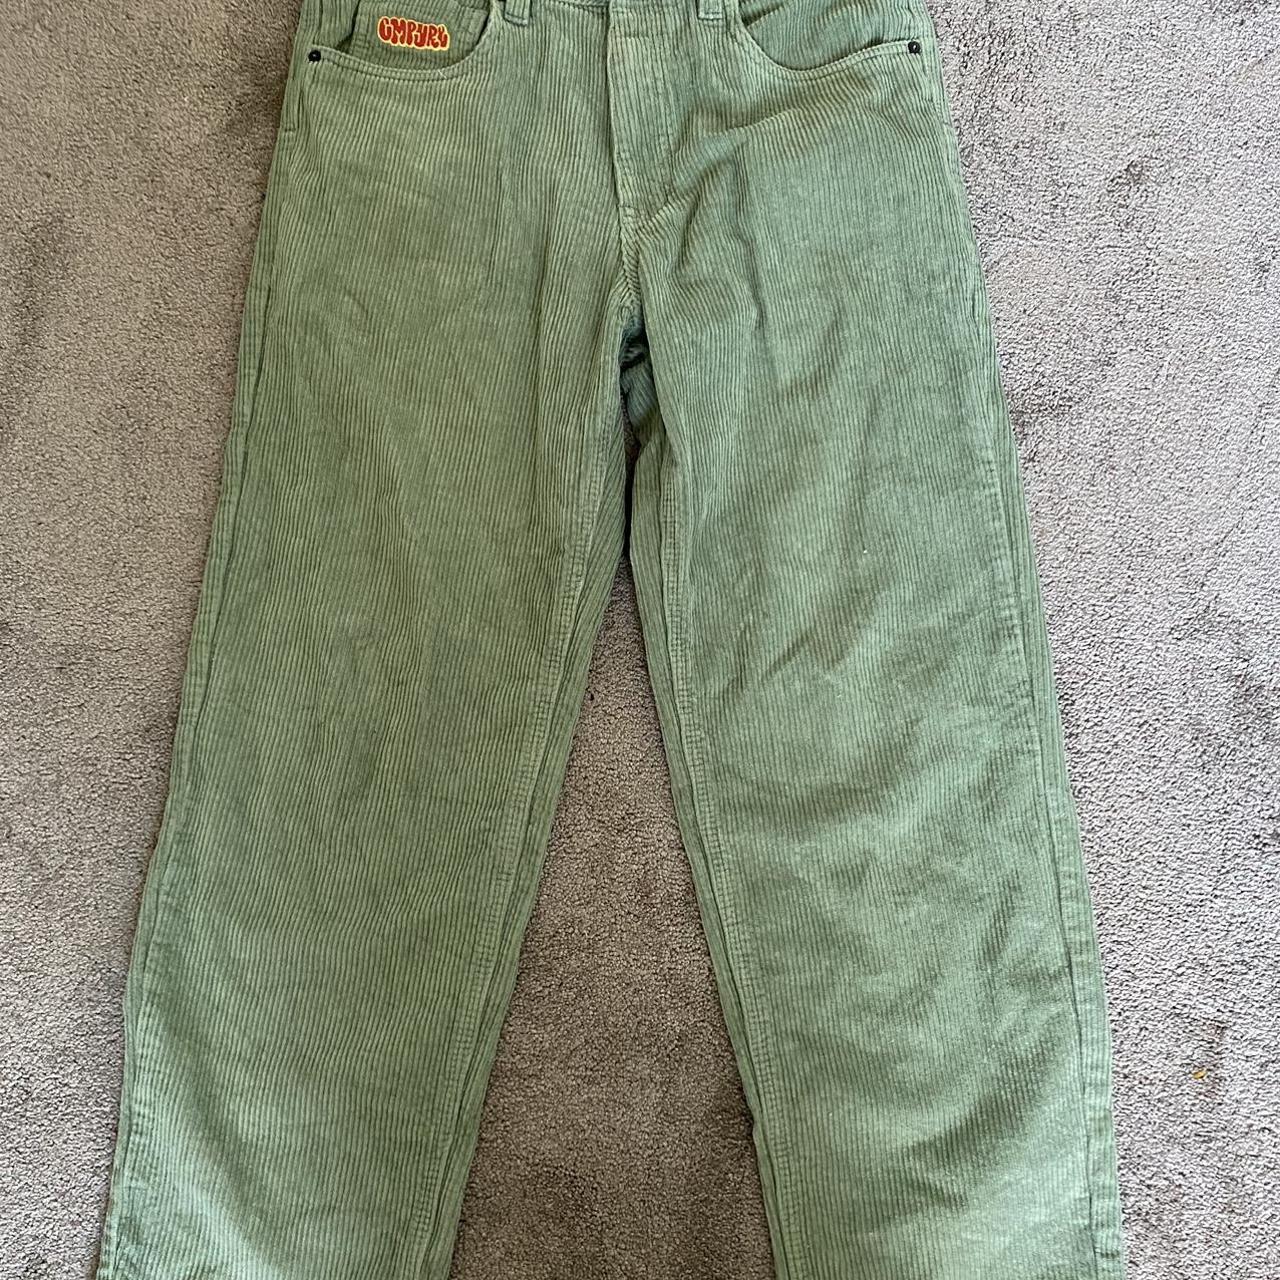 Empyre chords hedge green colour way Only worn once - Depop